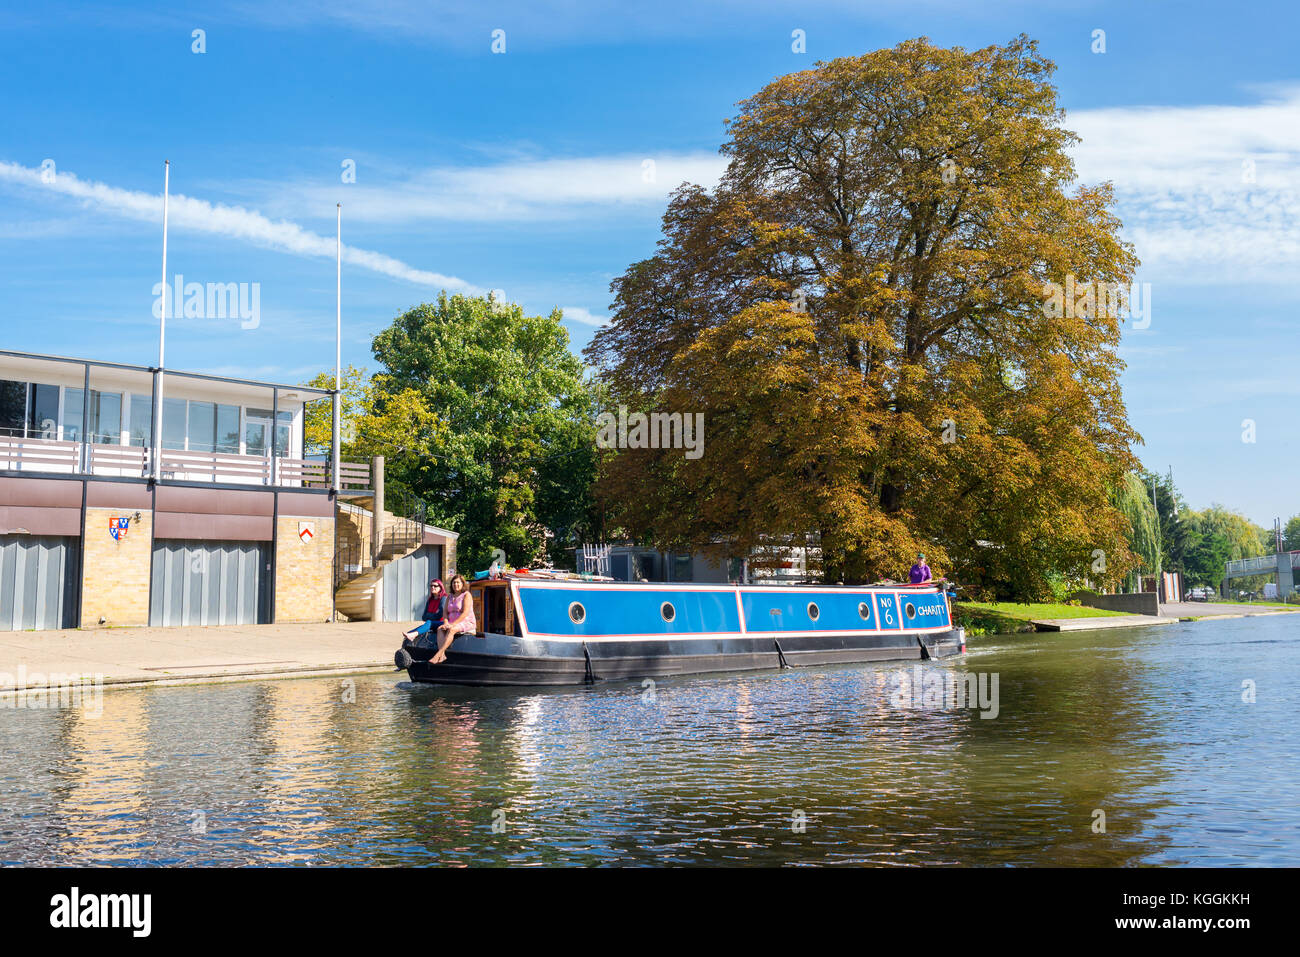 Two women sitting in the front prow of a houseboat barge navigating on the river Cam in Cambridge England, UK Stock Photo